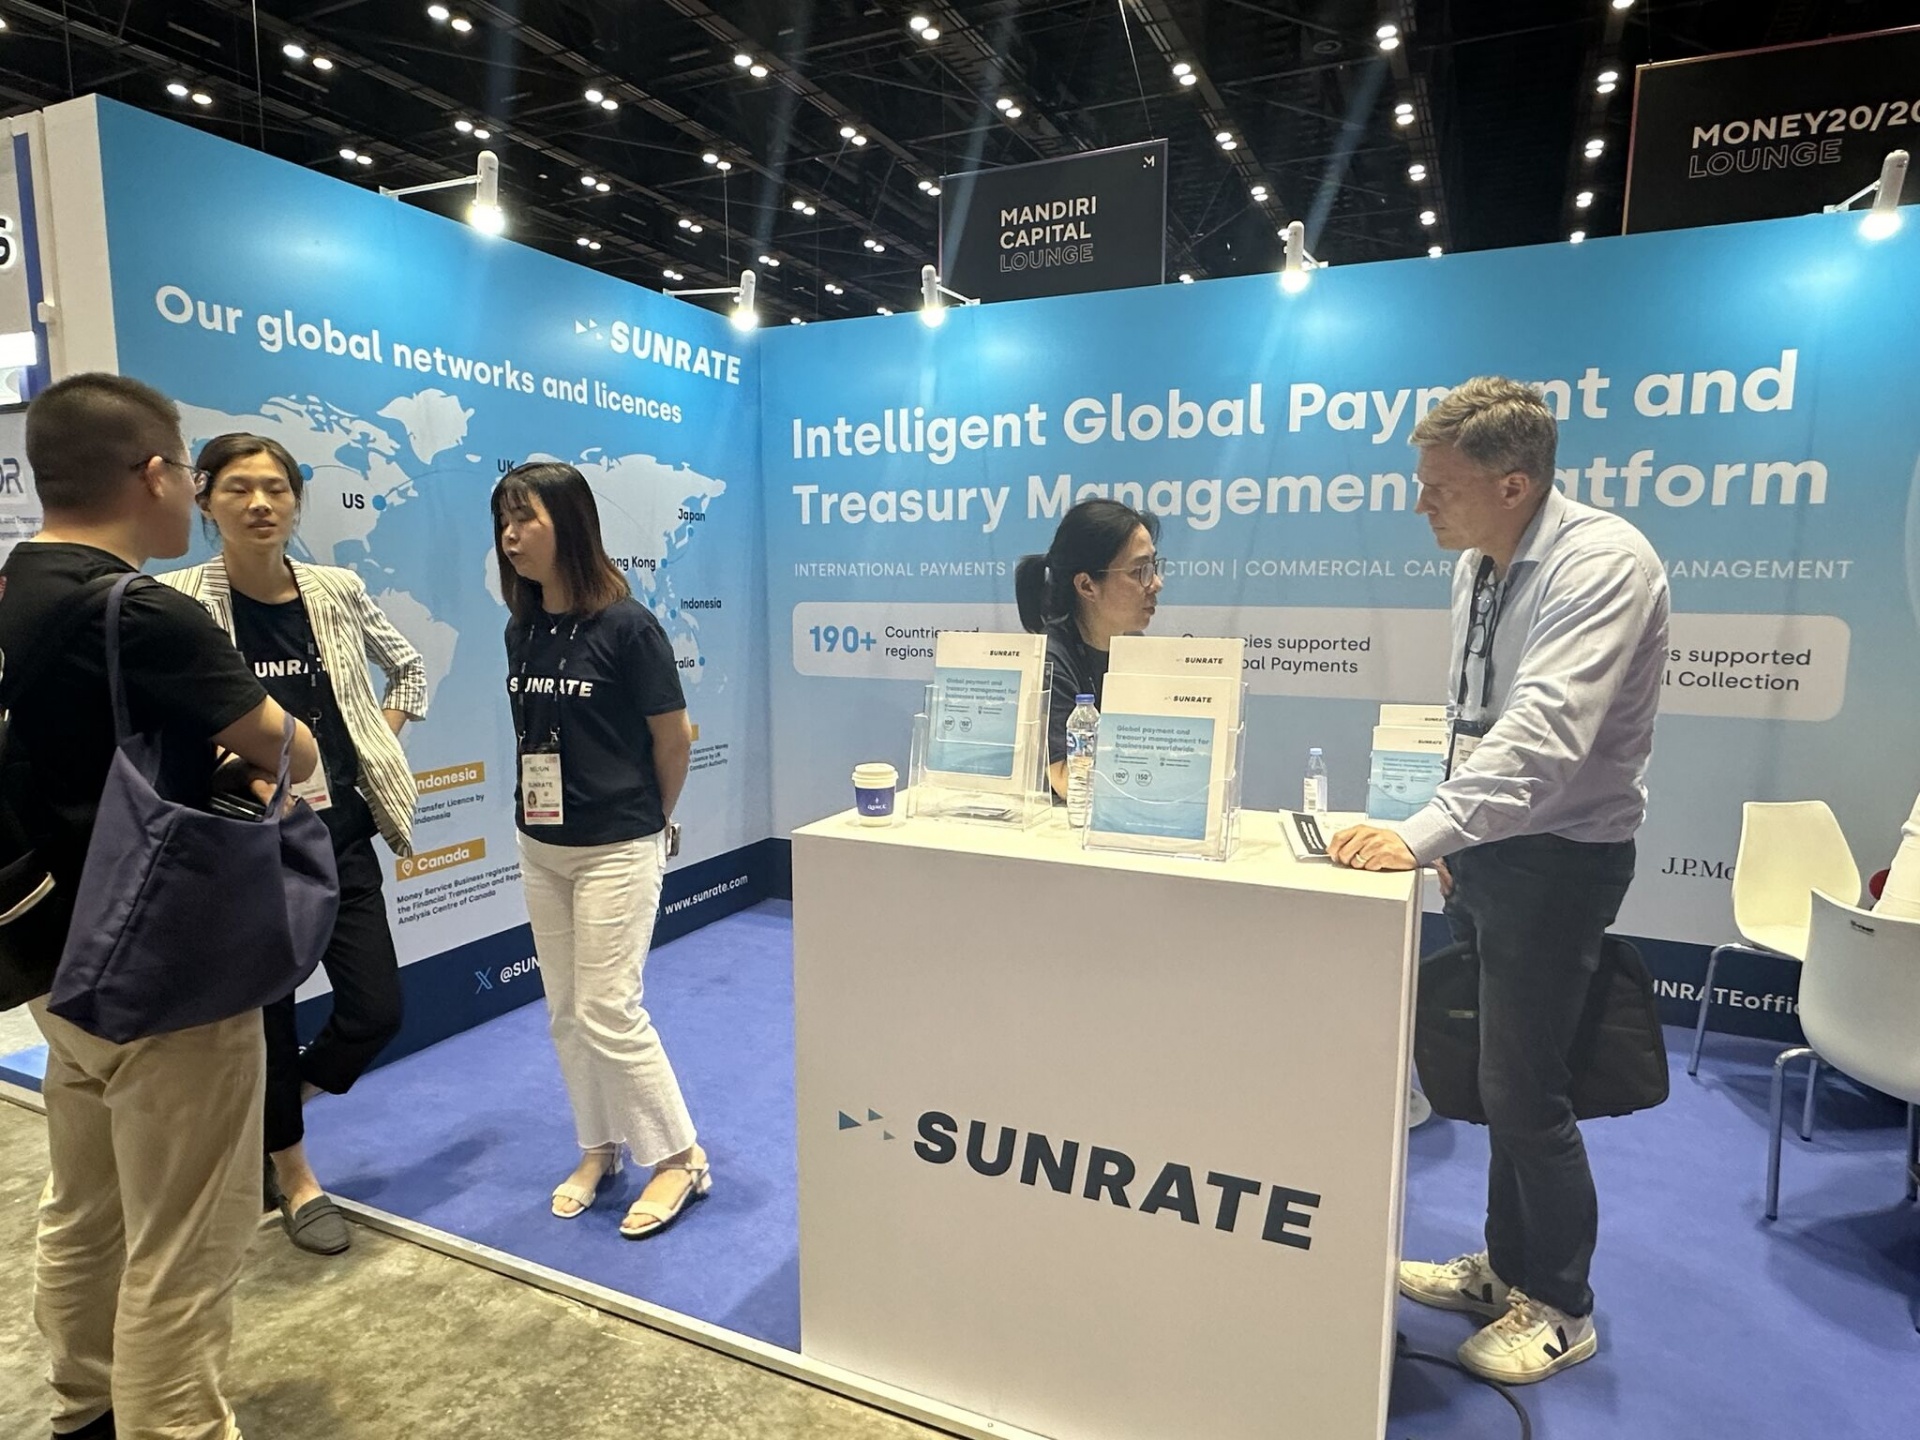 singapore headquartered sunrate debuts in vietnams payment landscape